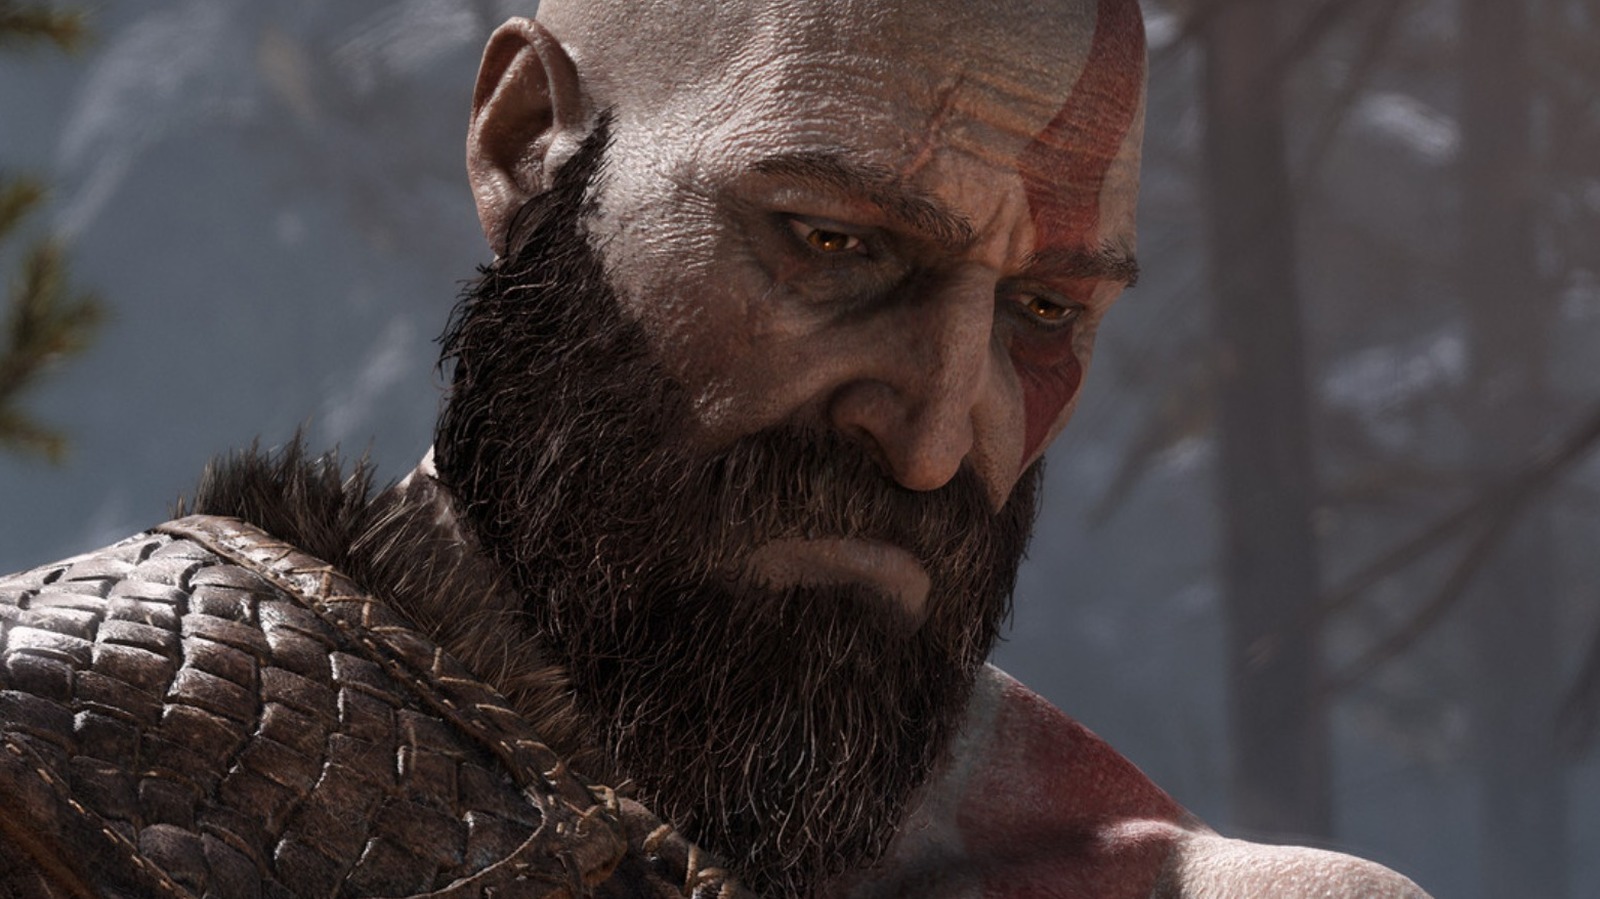 With Kratos' history of brutally killing the gods due to his rage